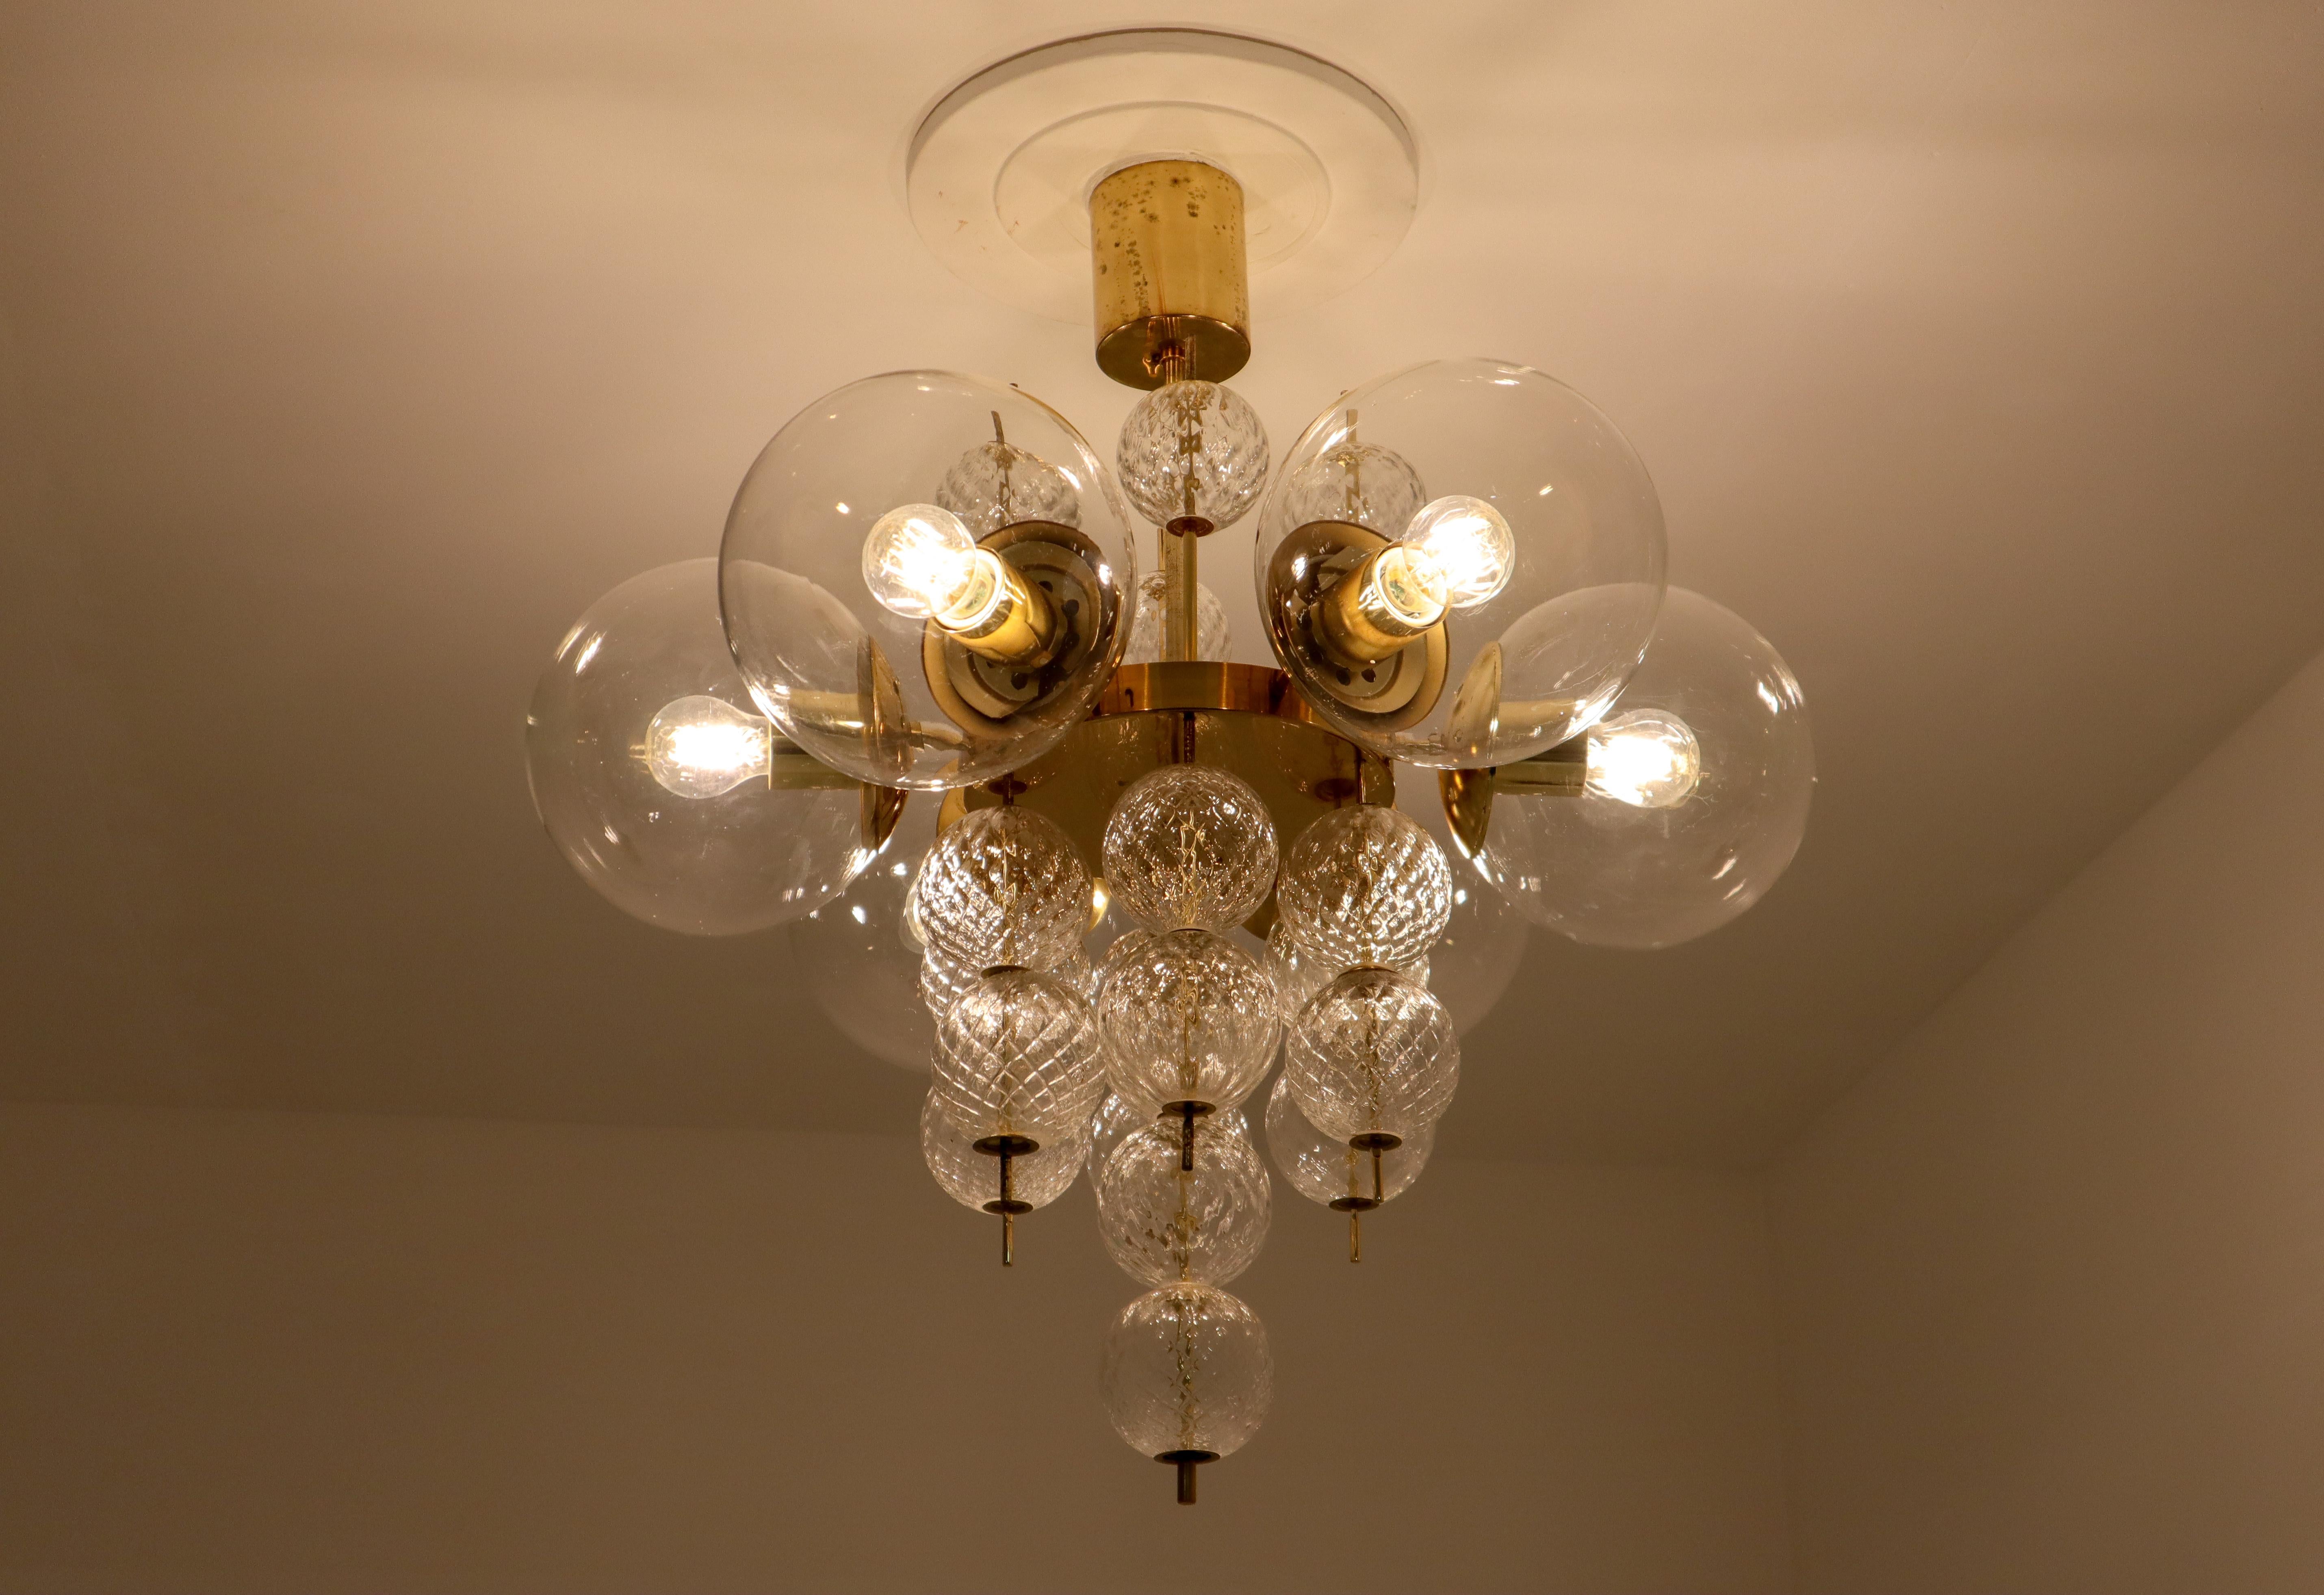 Large set brass chandeliers was produced in Europe in the 1970s. A spirited and chic design set chandeliers with brass fixture and handblown glass. The chandelier with brass frame consist of six lights, formed in a circle, with glass shades. The